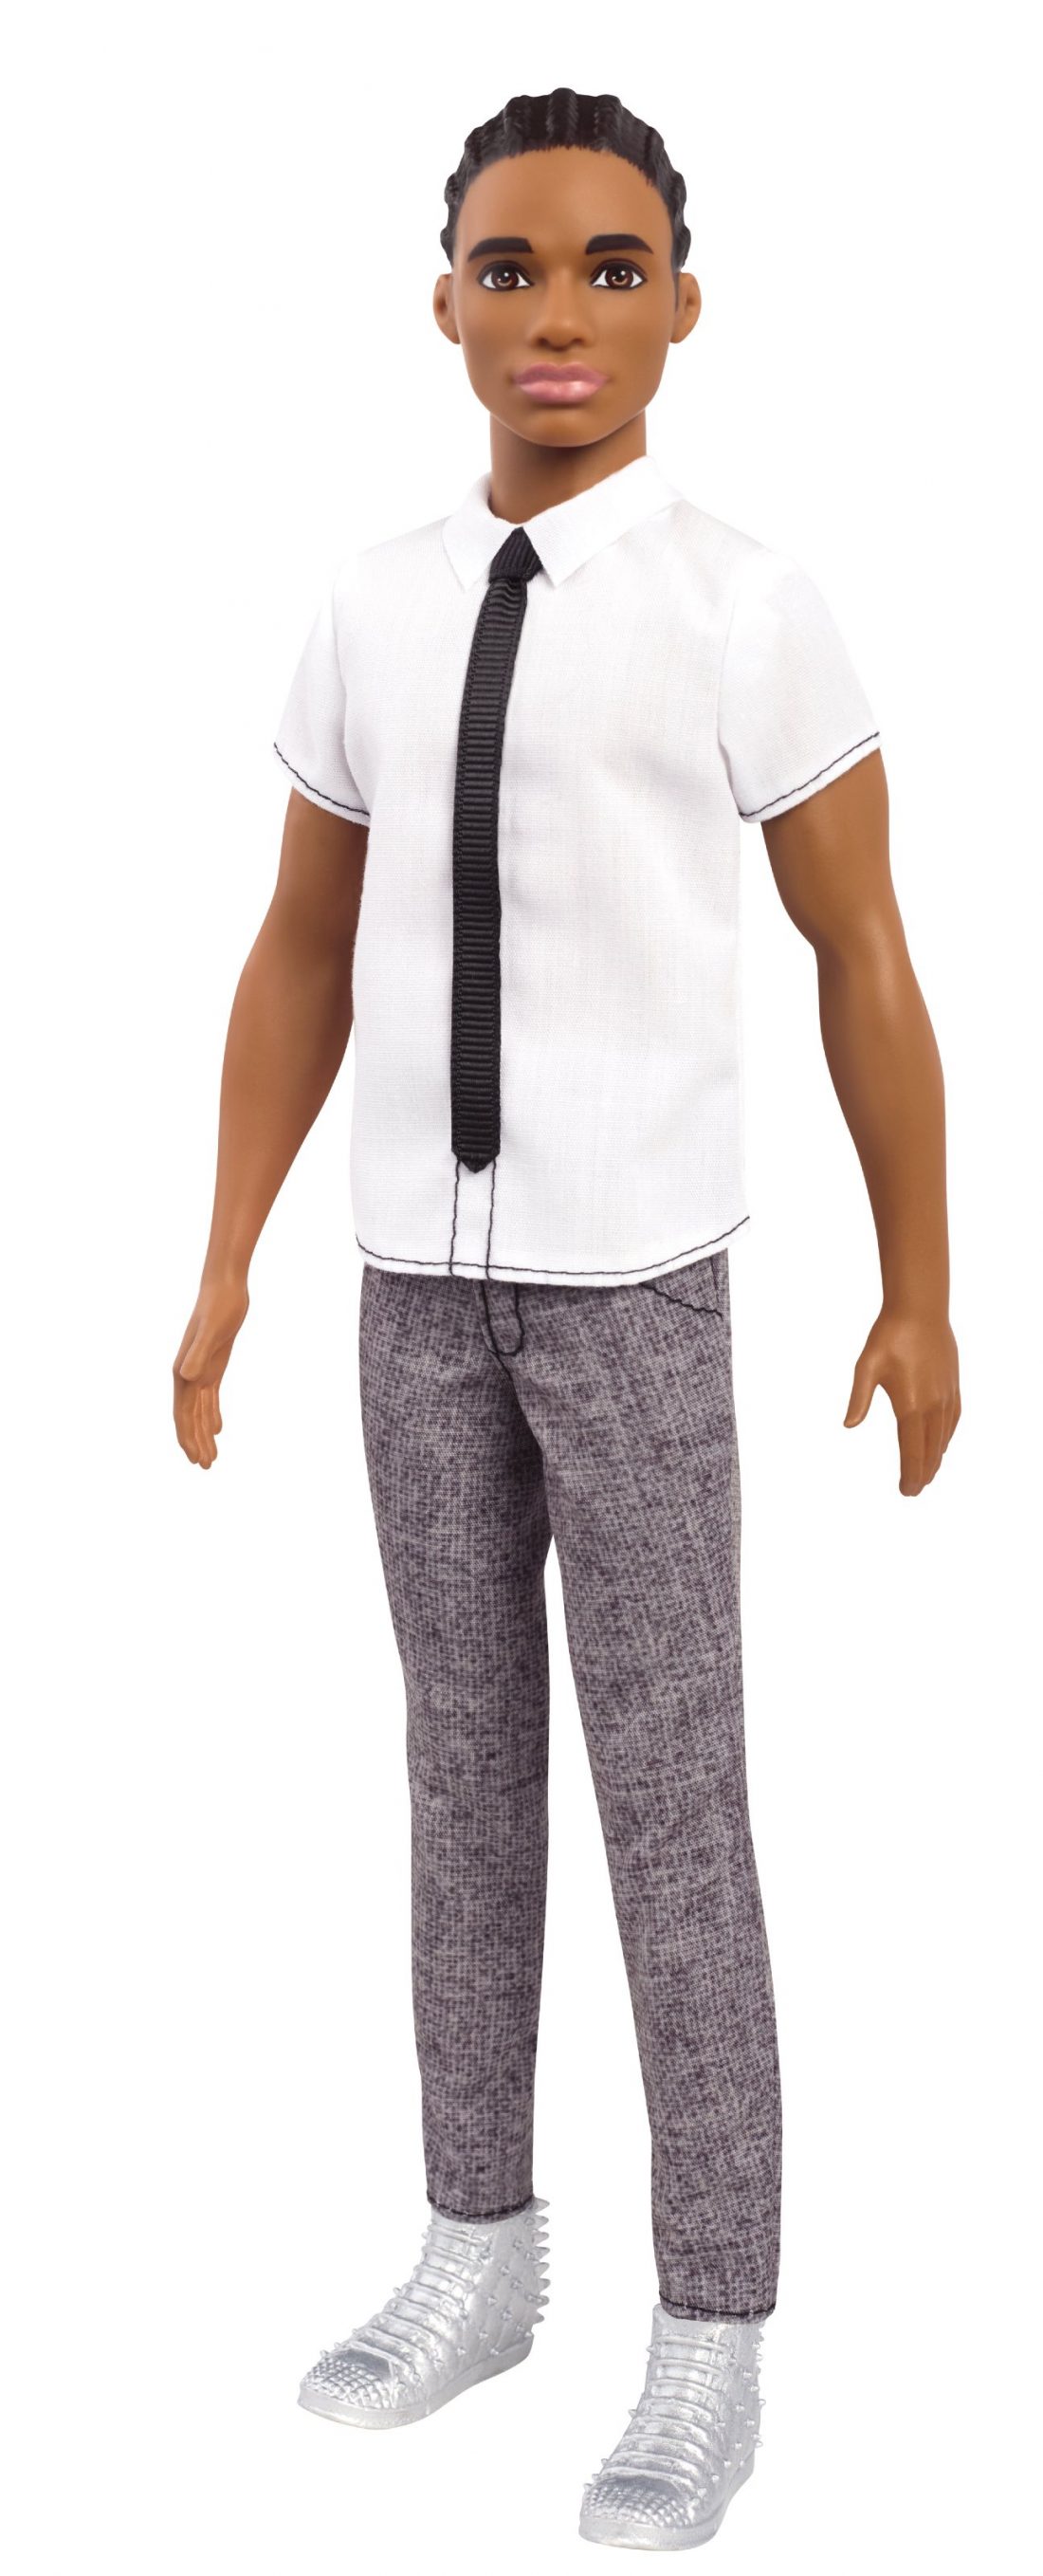 Ken gets the ‘brother’ makeover: Barbie® Brand shows commitment to ...